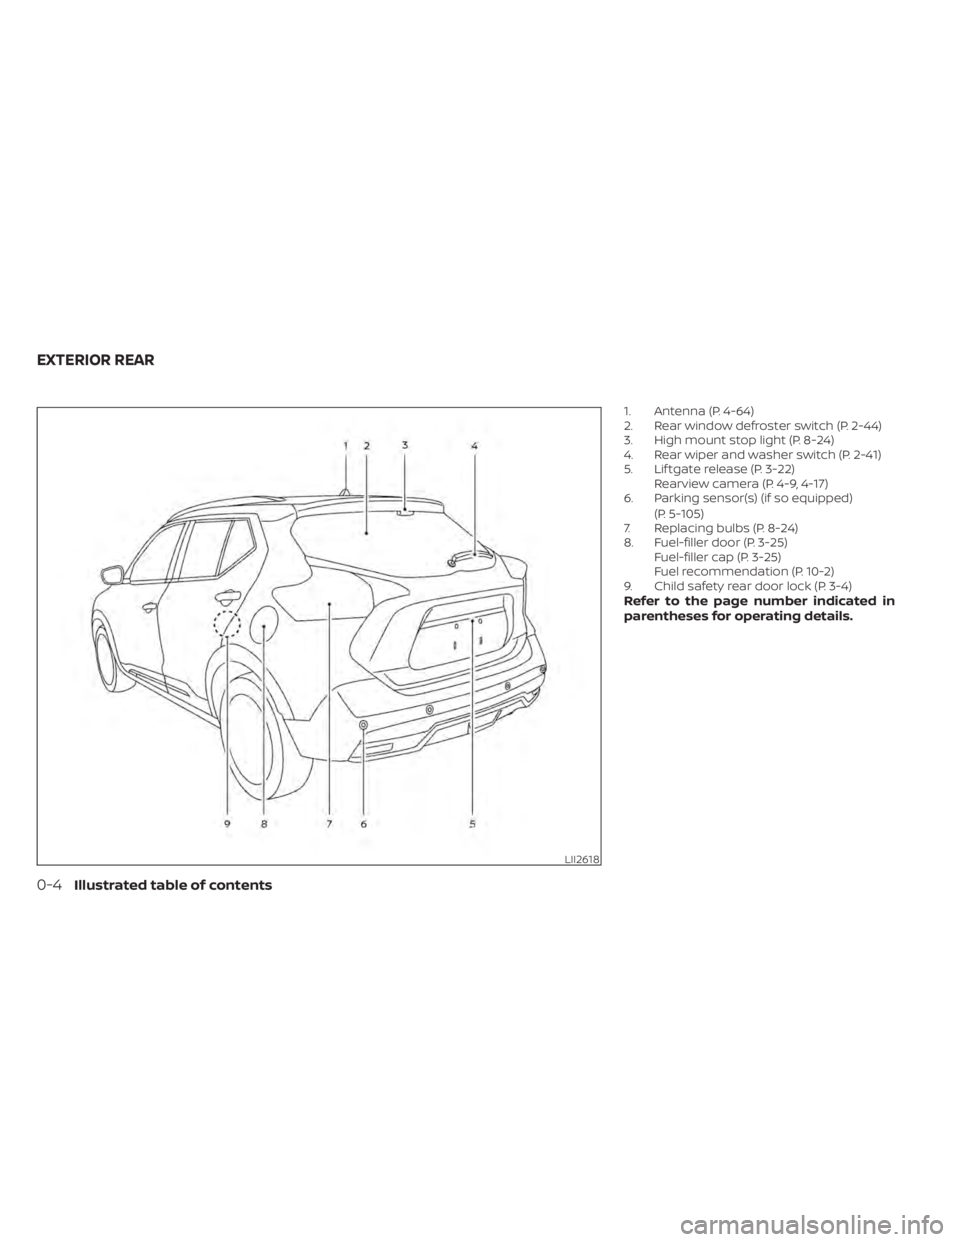 NISSAN KICKS 2020  Owner´s Manual 1. Antenna (P. 4-64)
2. Rear window defroster switch (P. 2-44)
3. High mount stop light (P. 8-24)
4. Rear wiper and washer switch (P. 2-41)
5. Lif tgate release (P. 3-22)Rearview camera (P. 4-9, 4-17)